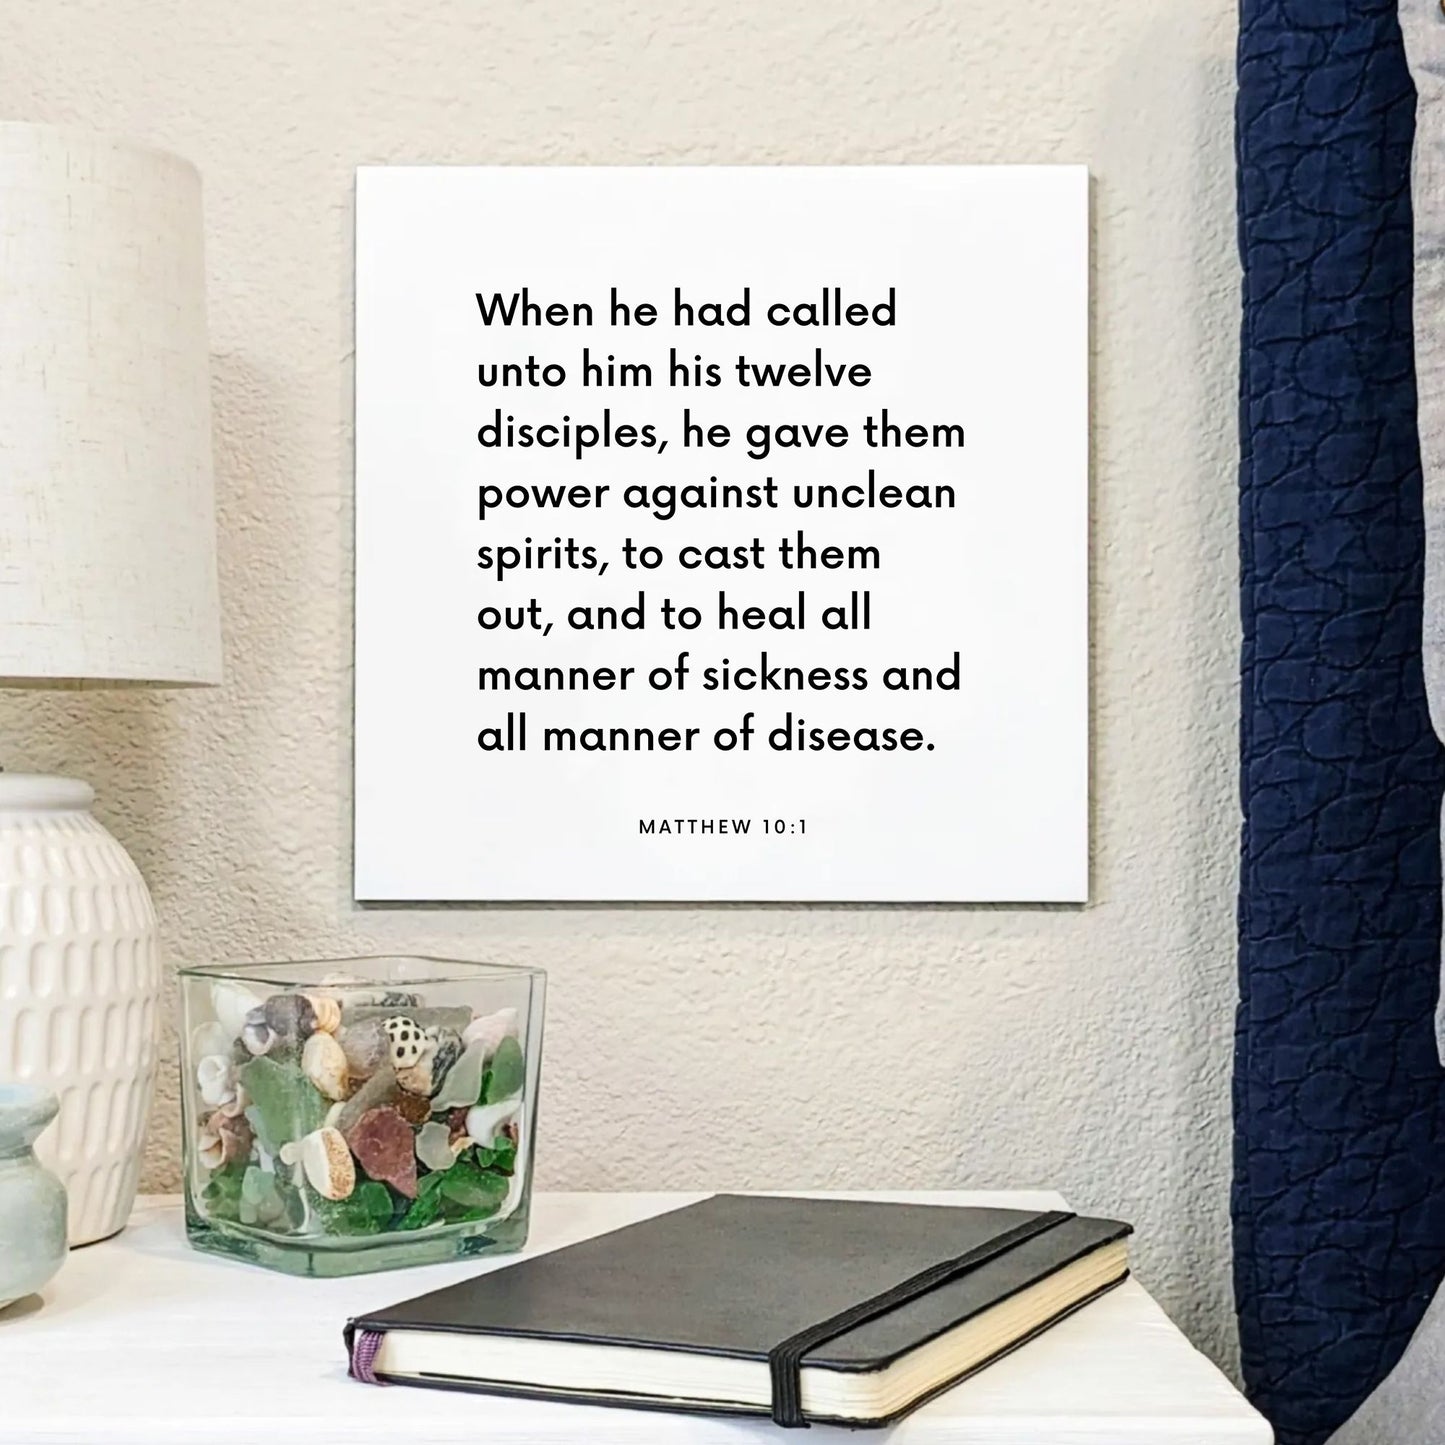 Bedside mouting of the scripture tile for Matthew 10:1 - "When he had called his twelve disciples, he gave them power"